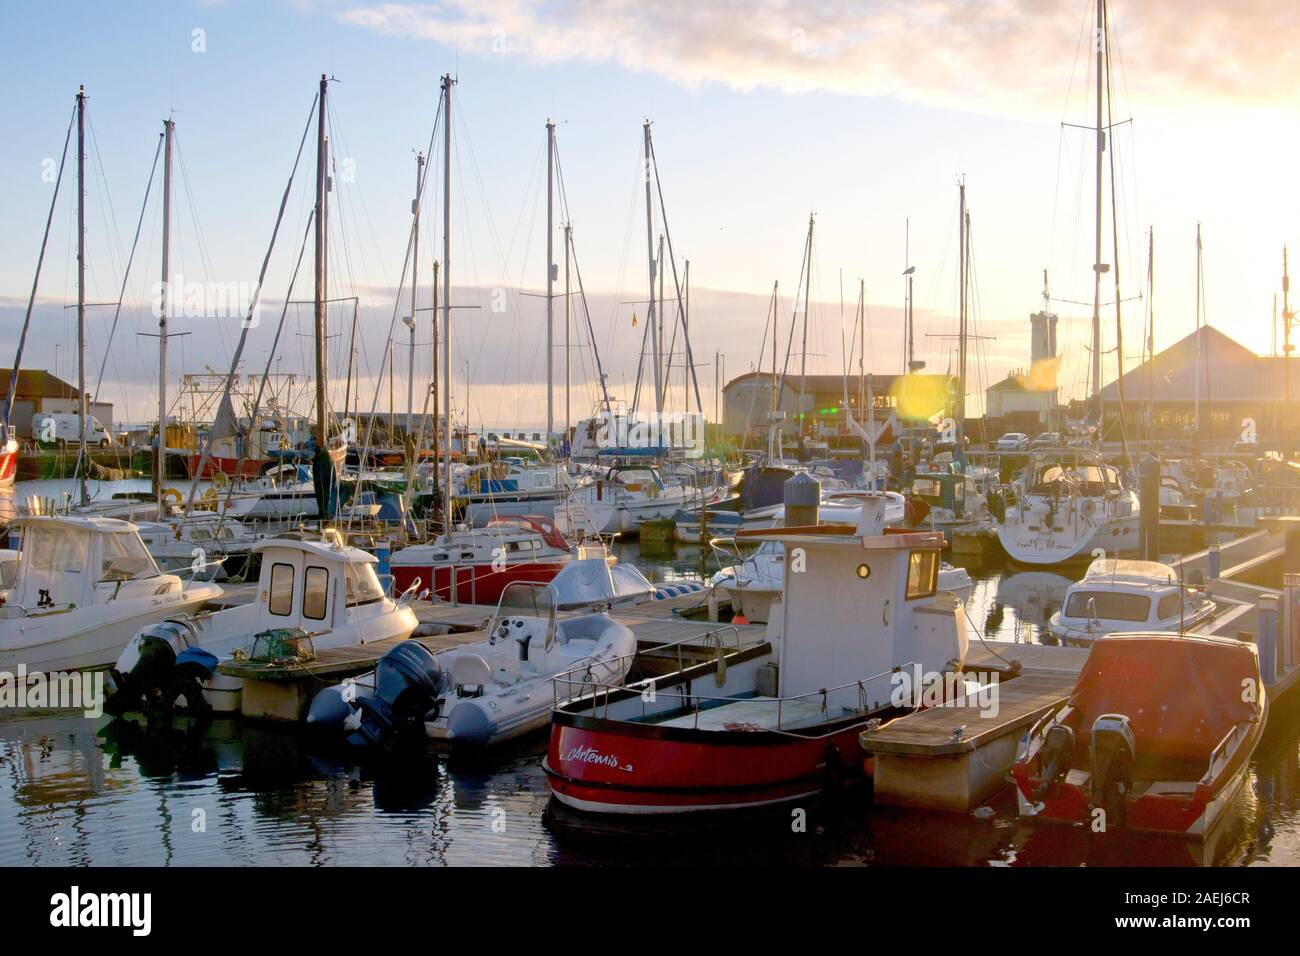 The marina at Arbroath harbour, filled with yachts and pleasure craft, lit by the warm directional light of a low sun at the end of the day. Stock Photo